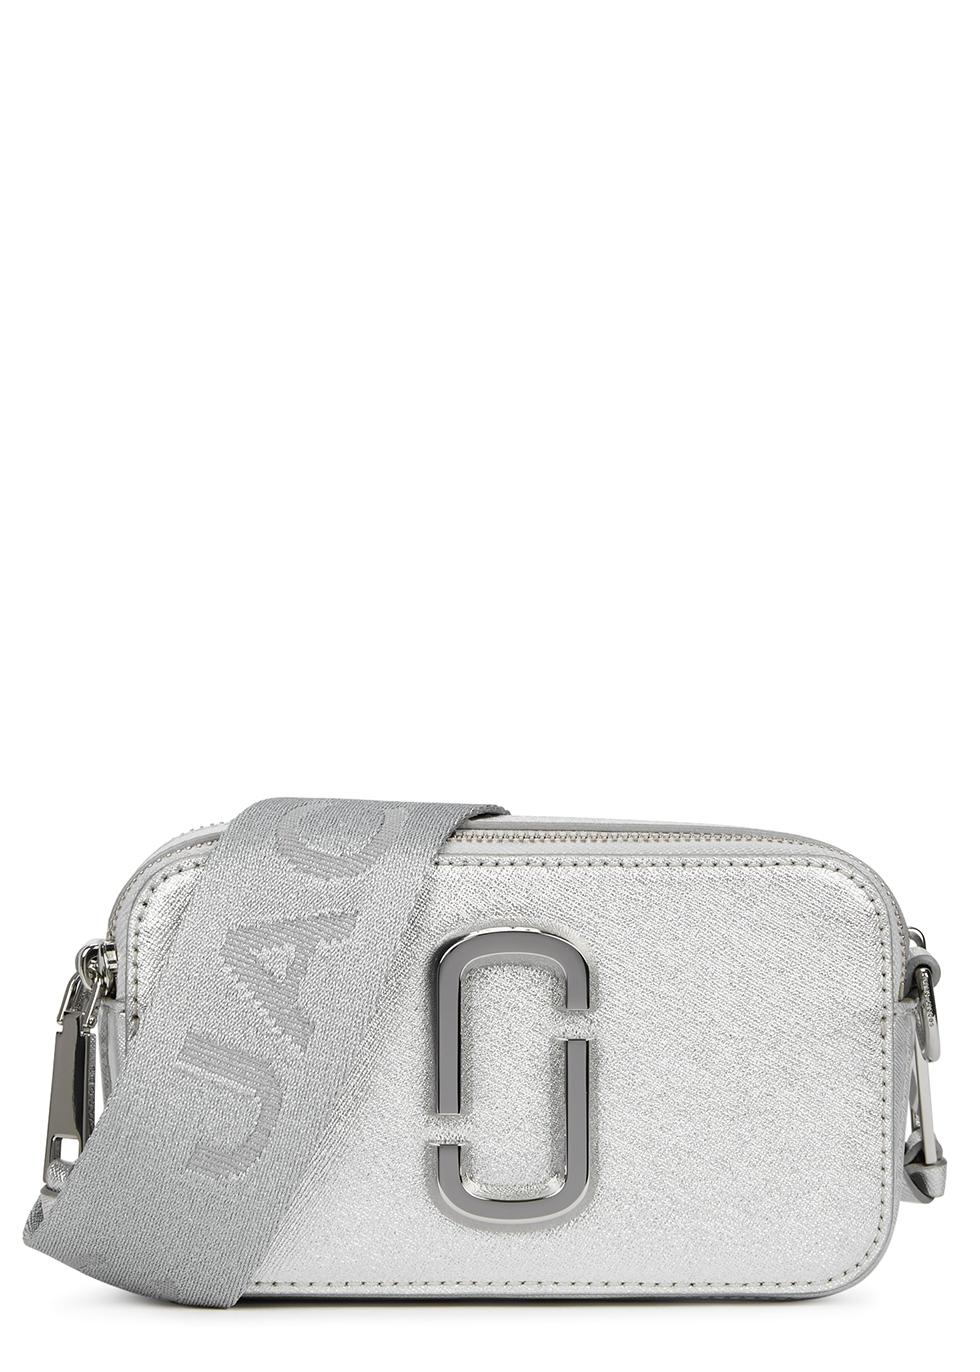 Marc Jacobs, Bags, Silver Marc Jacobs Softshot 2 Crossbody Bag Used